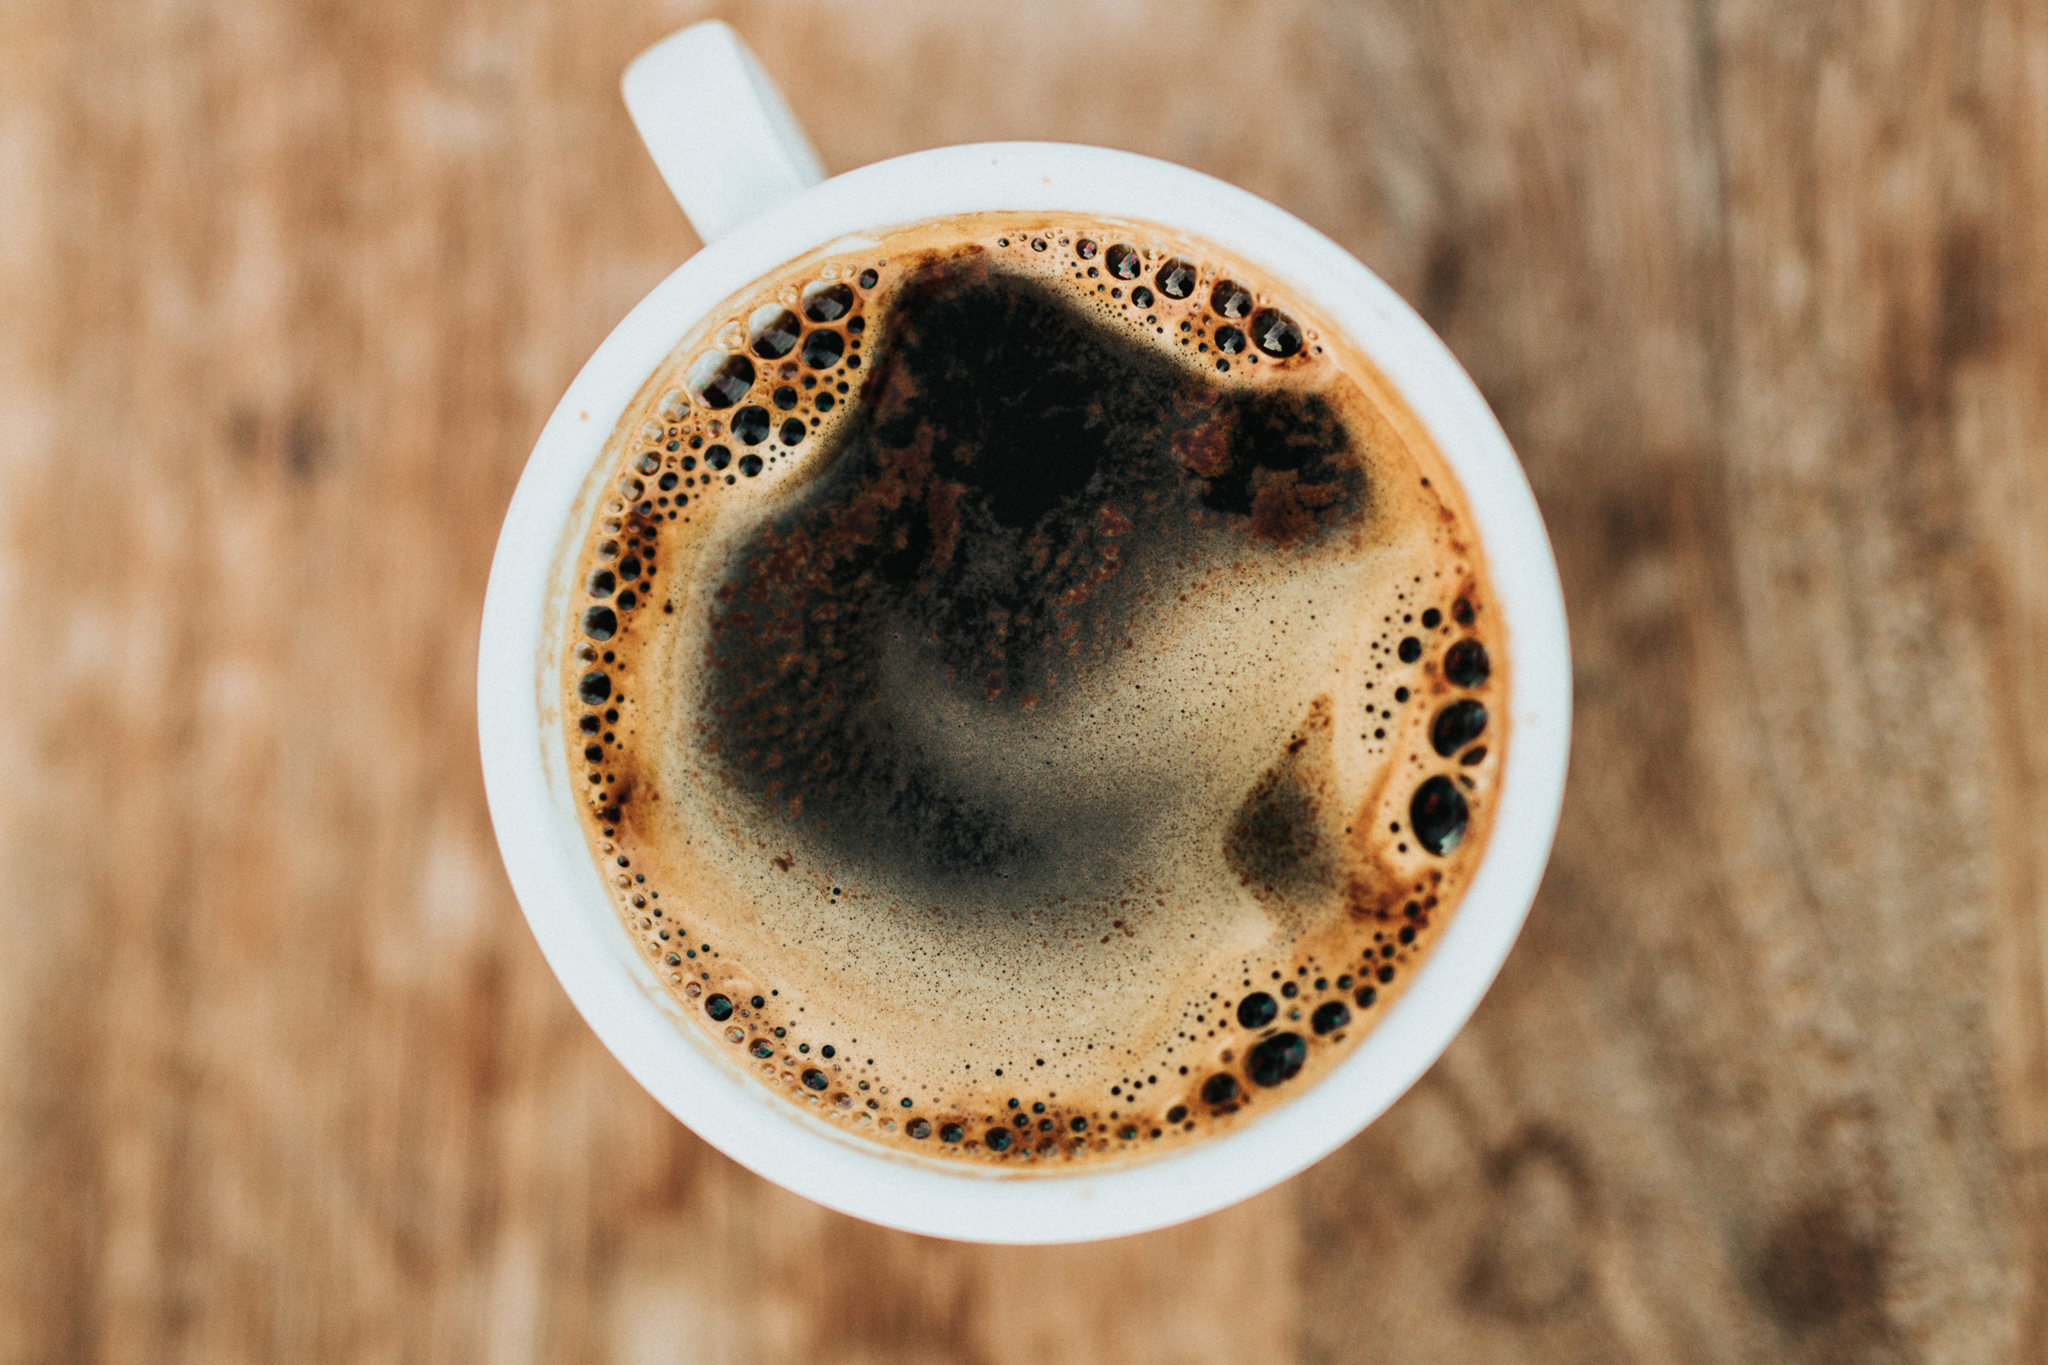 https://www.themanual.com/wp-content/uploads/sites/9/2019/12/cup-of-coffee-unsplash.jpg?fit=800%2C532&p=1